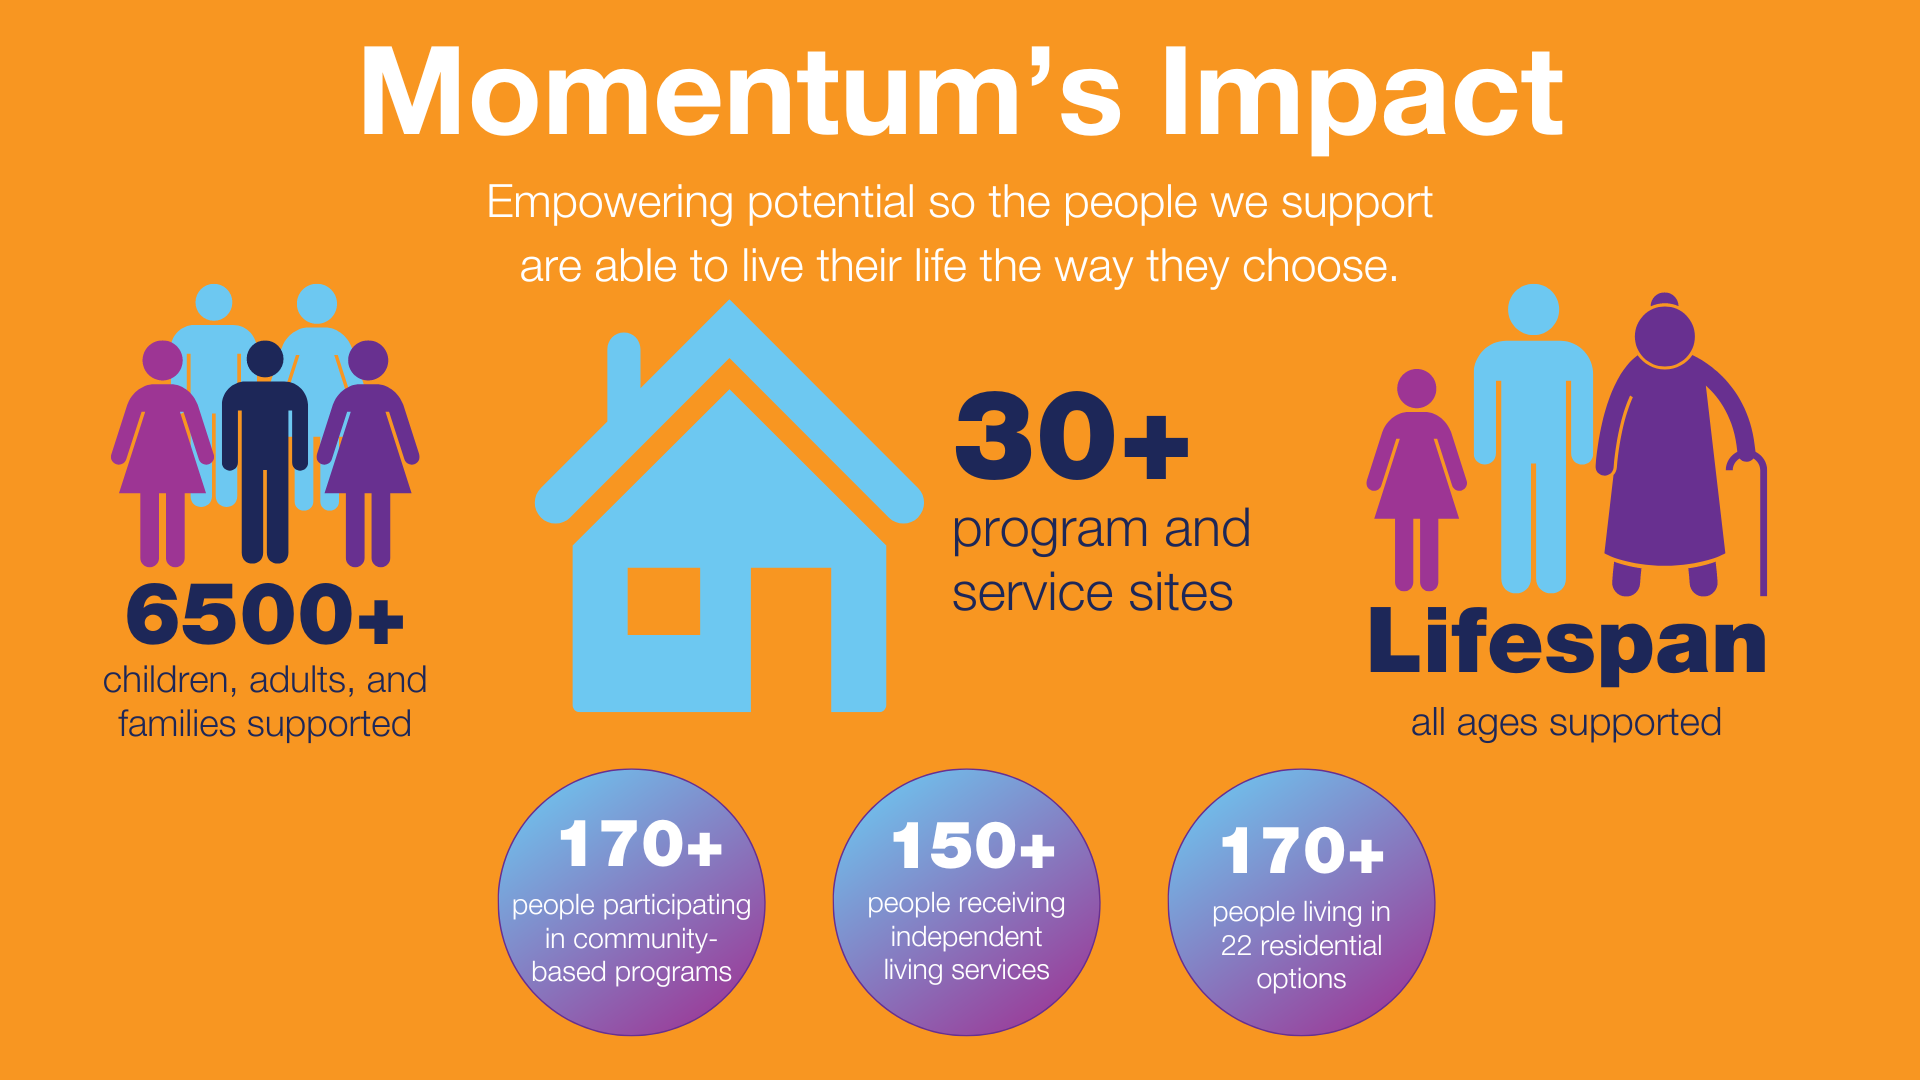 Take a look at how Momentum is impacting lives.